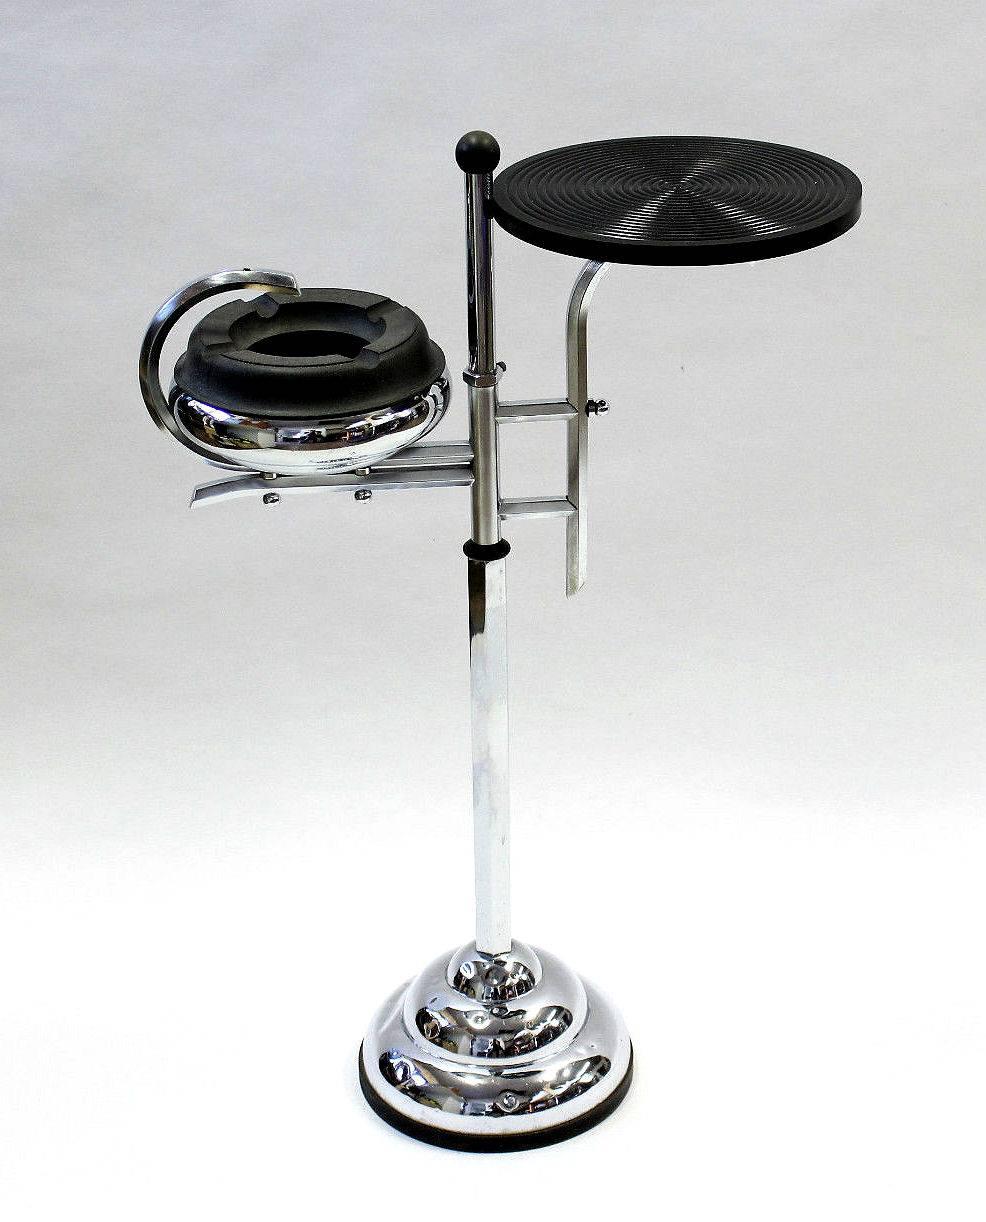 Superb 1930's Art Deco chrome and bakelite smokers stand with drinks table incorporated. Very modernist in style and would easily integrate with both period and modern homes. Great looking piece, perhaps for an office or near your cocktail bar.